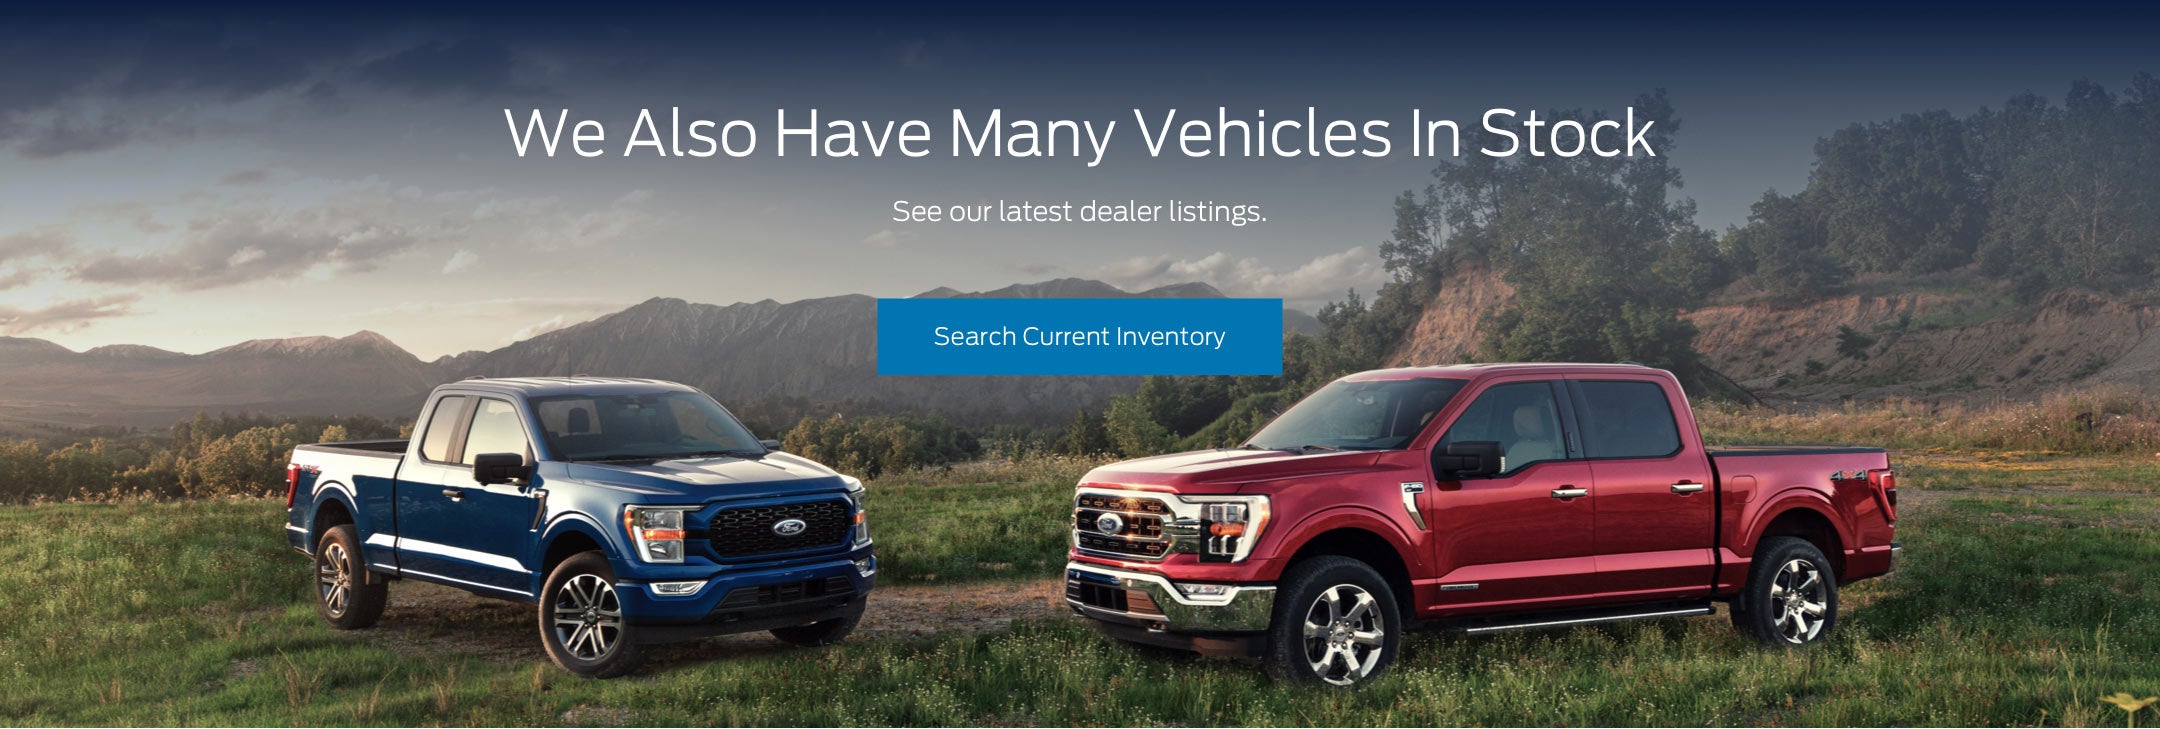 Ford vehicles in stock | Coughlin Ford of Circleville in Circleville OH